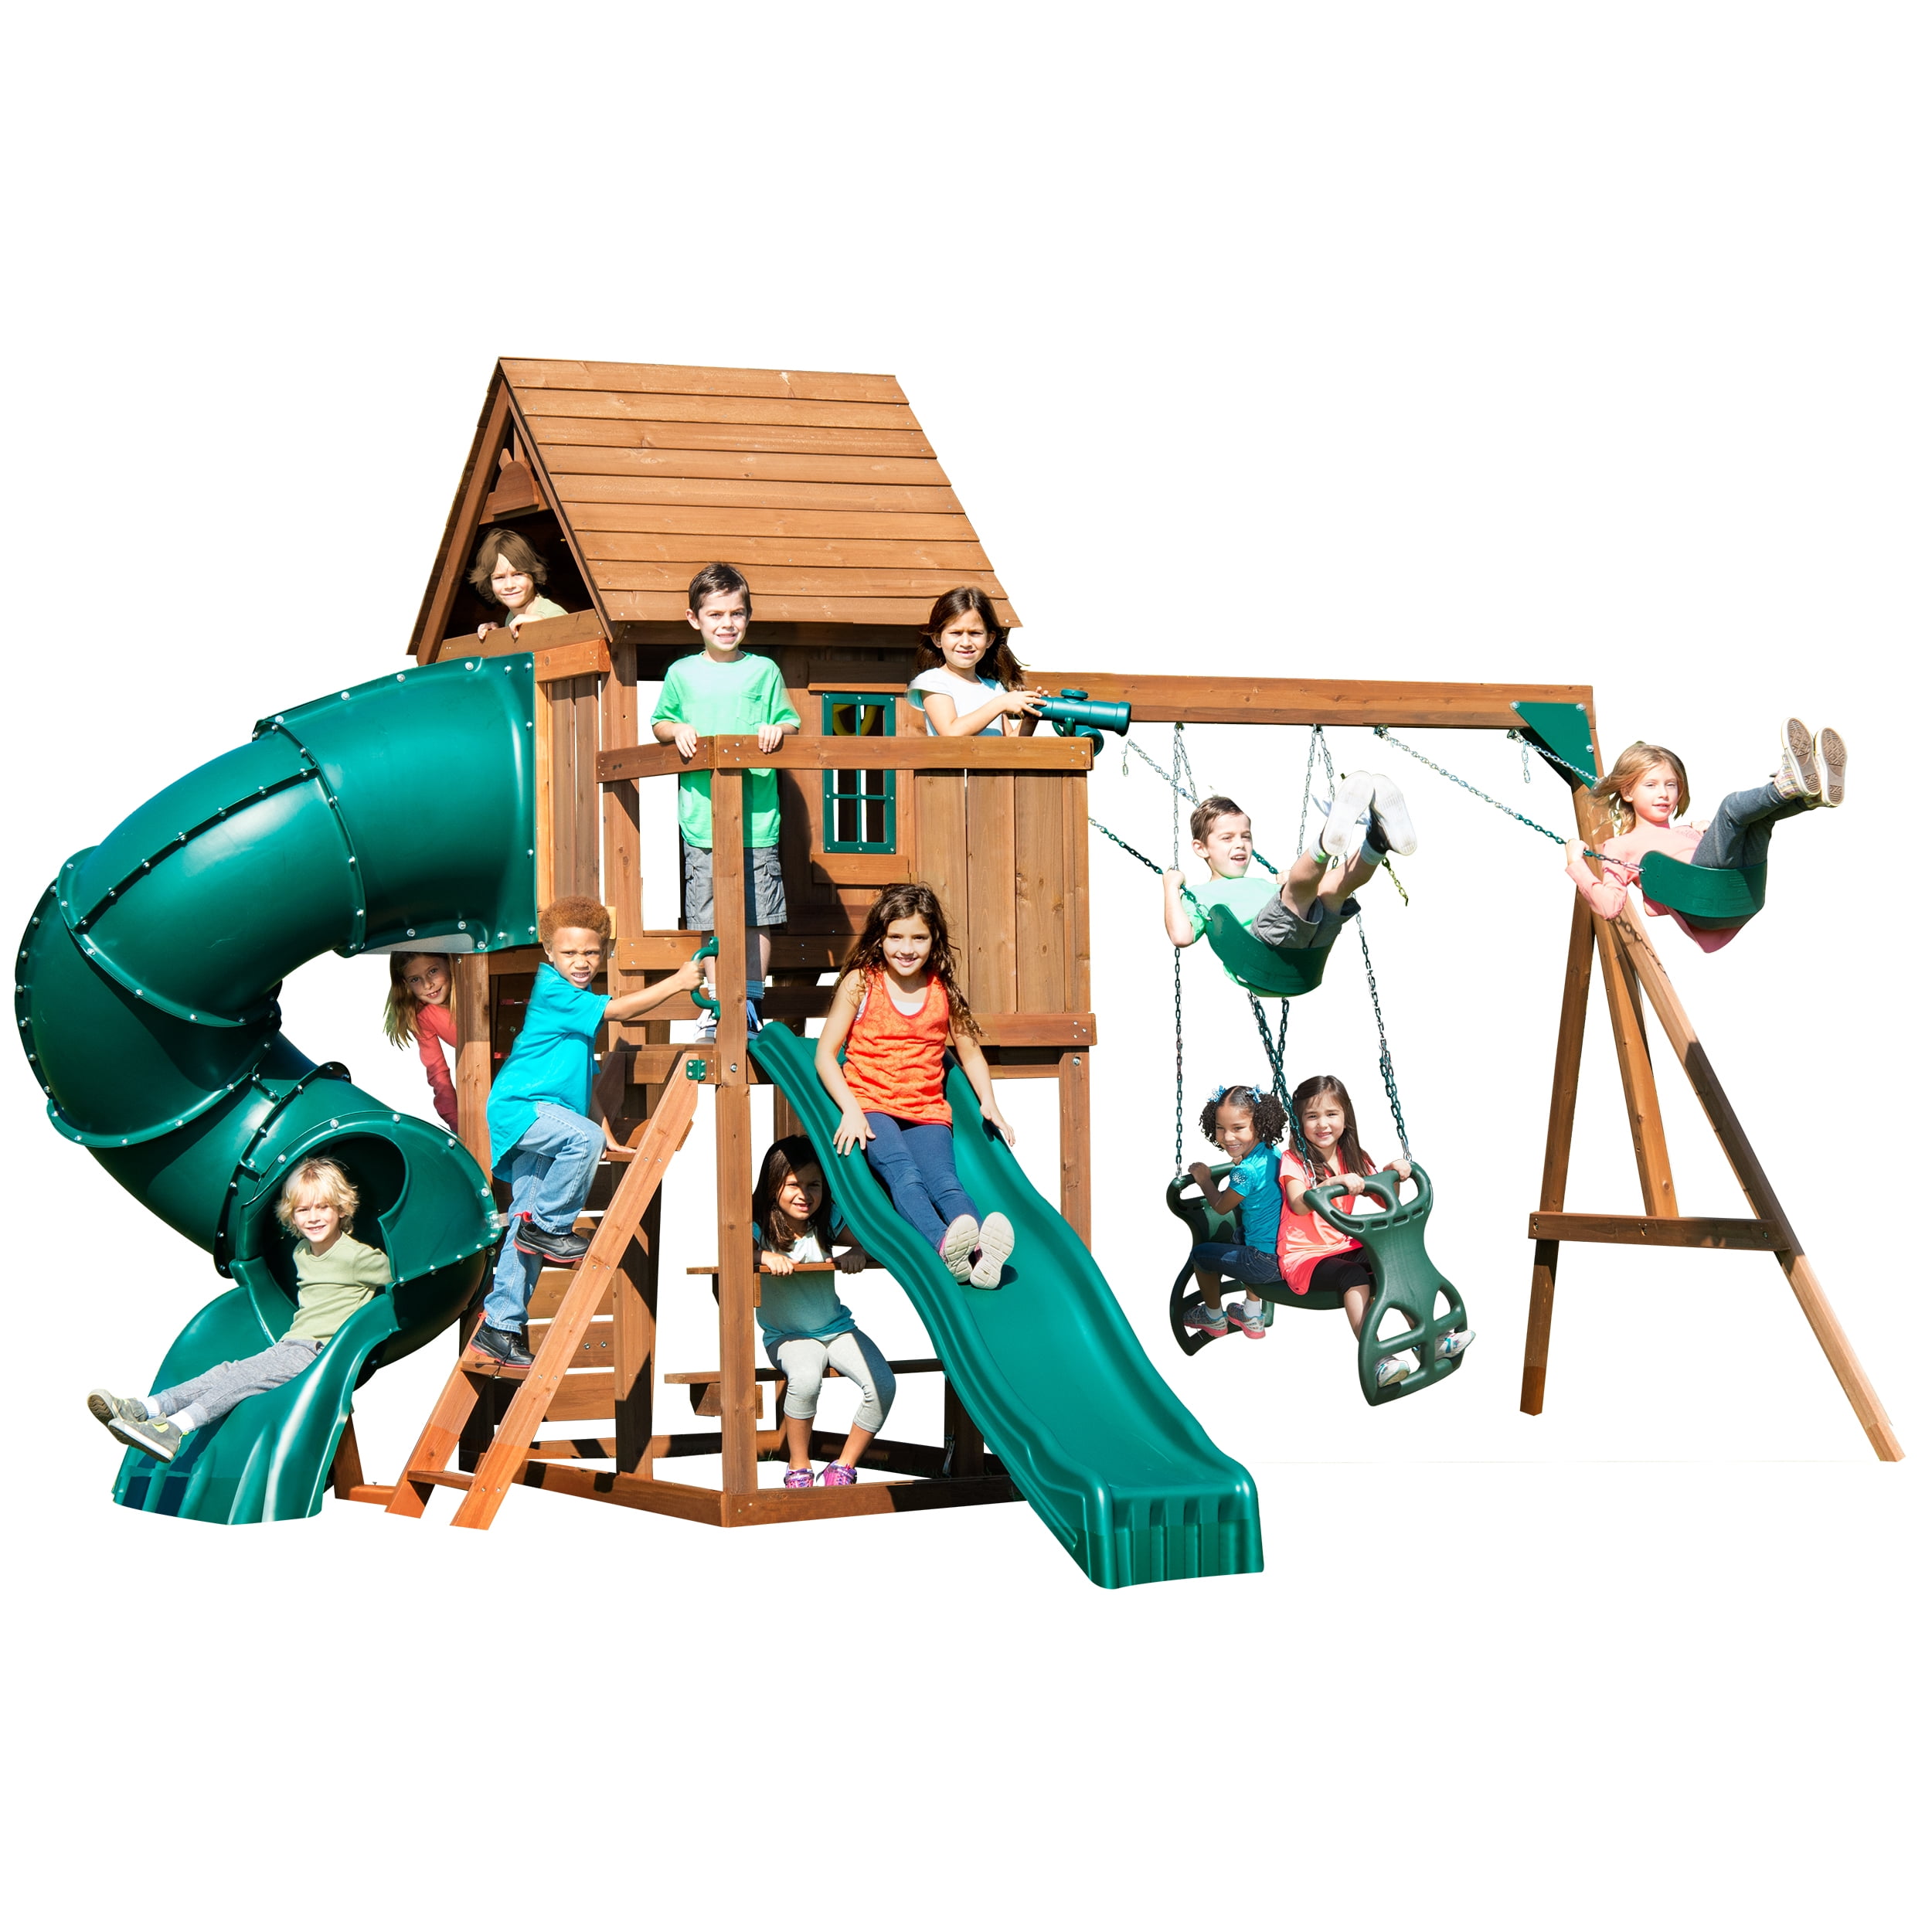 Swing-N-Slide Tremont Tower Wooden Complete Play Set with Two Slides